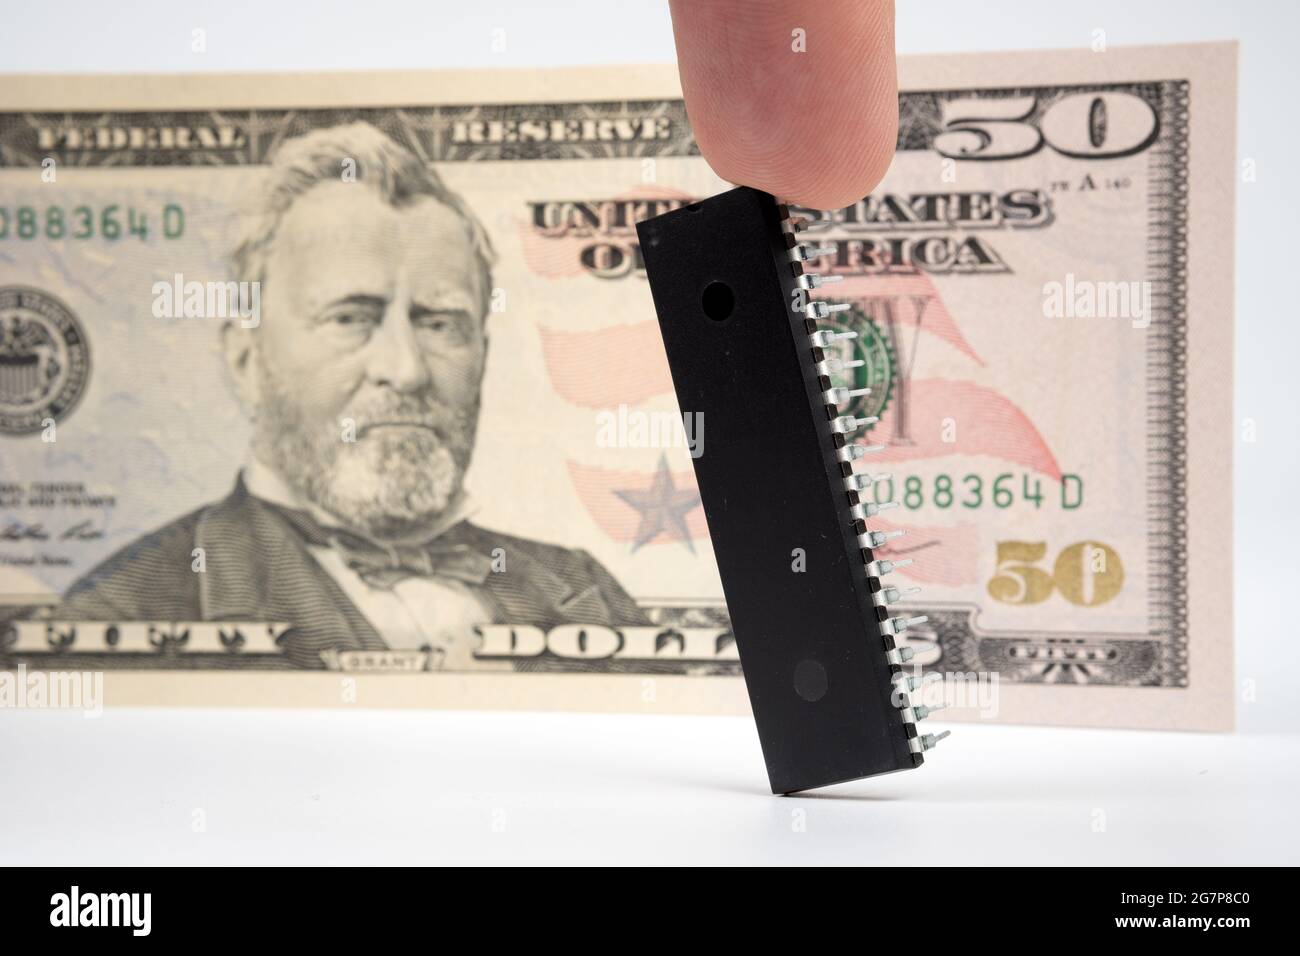 Large computer chip placed next to 50 US dollar banknote. Concept for investment in semiconductor industry and golbal chip shortage. Stock Photo